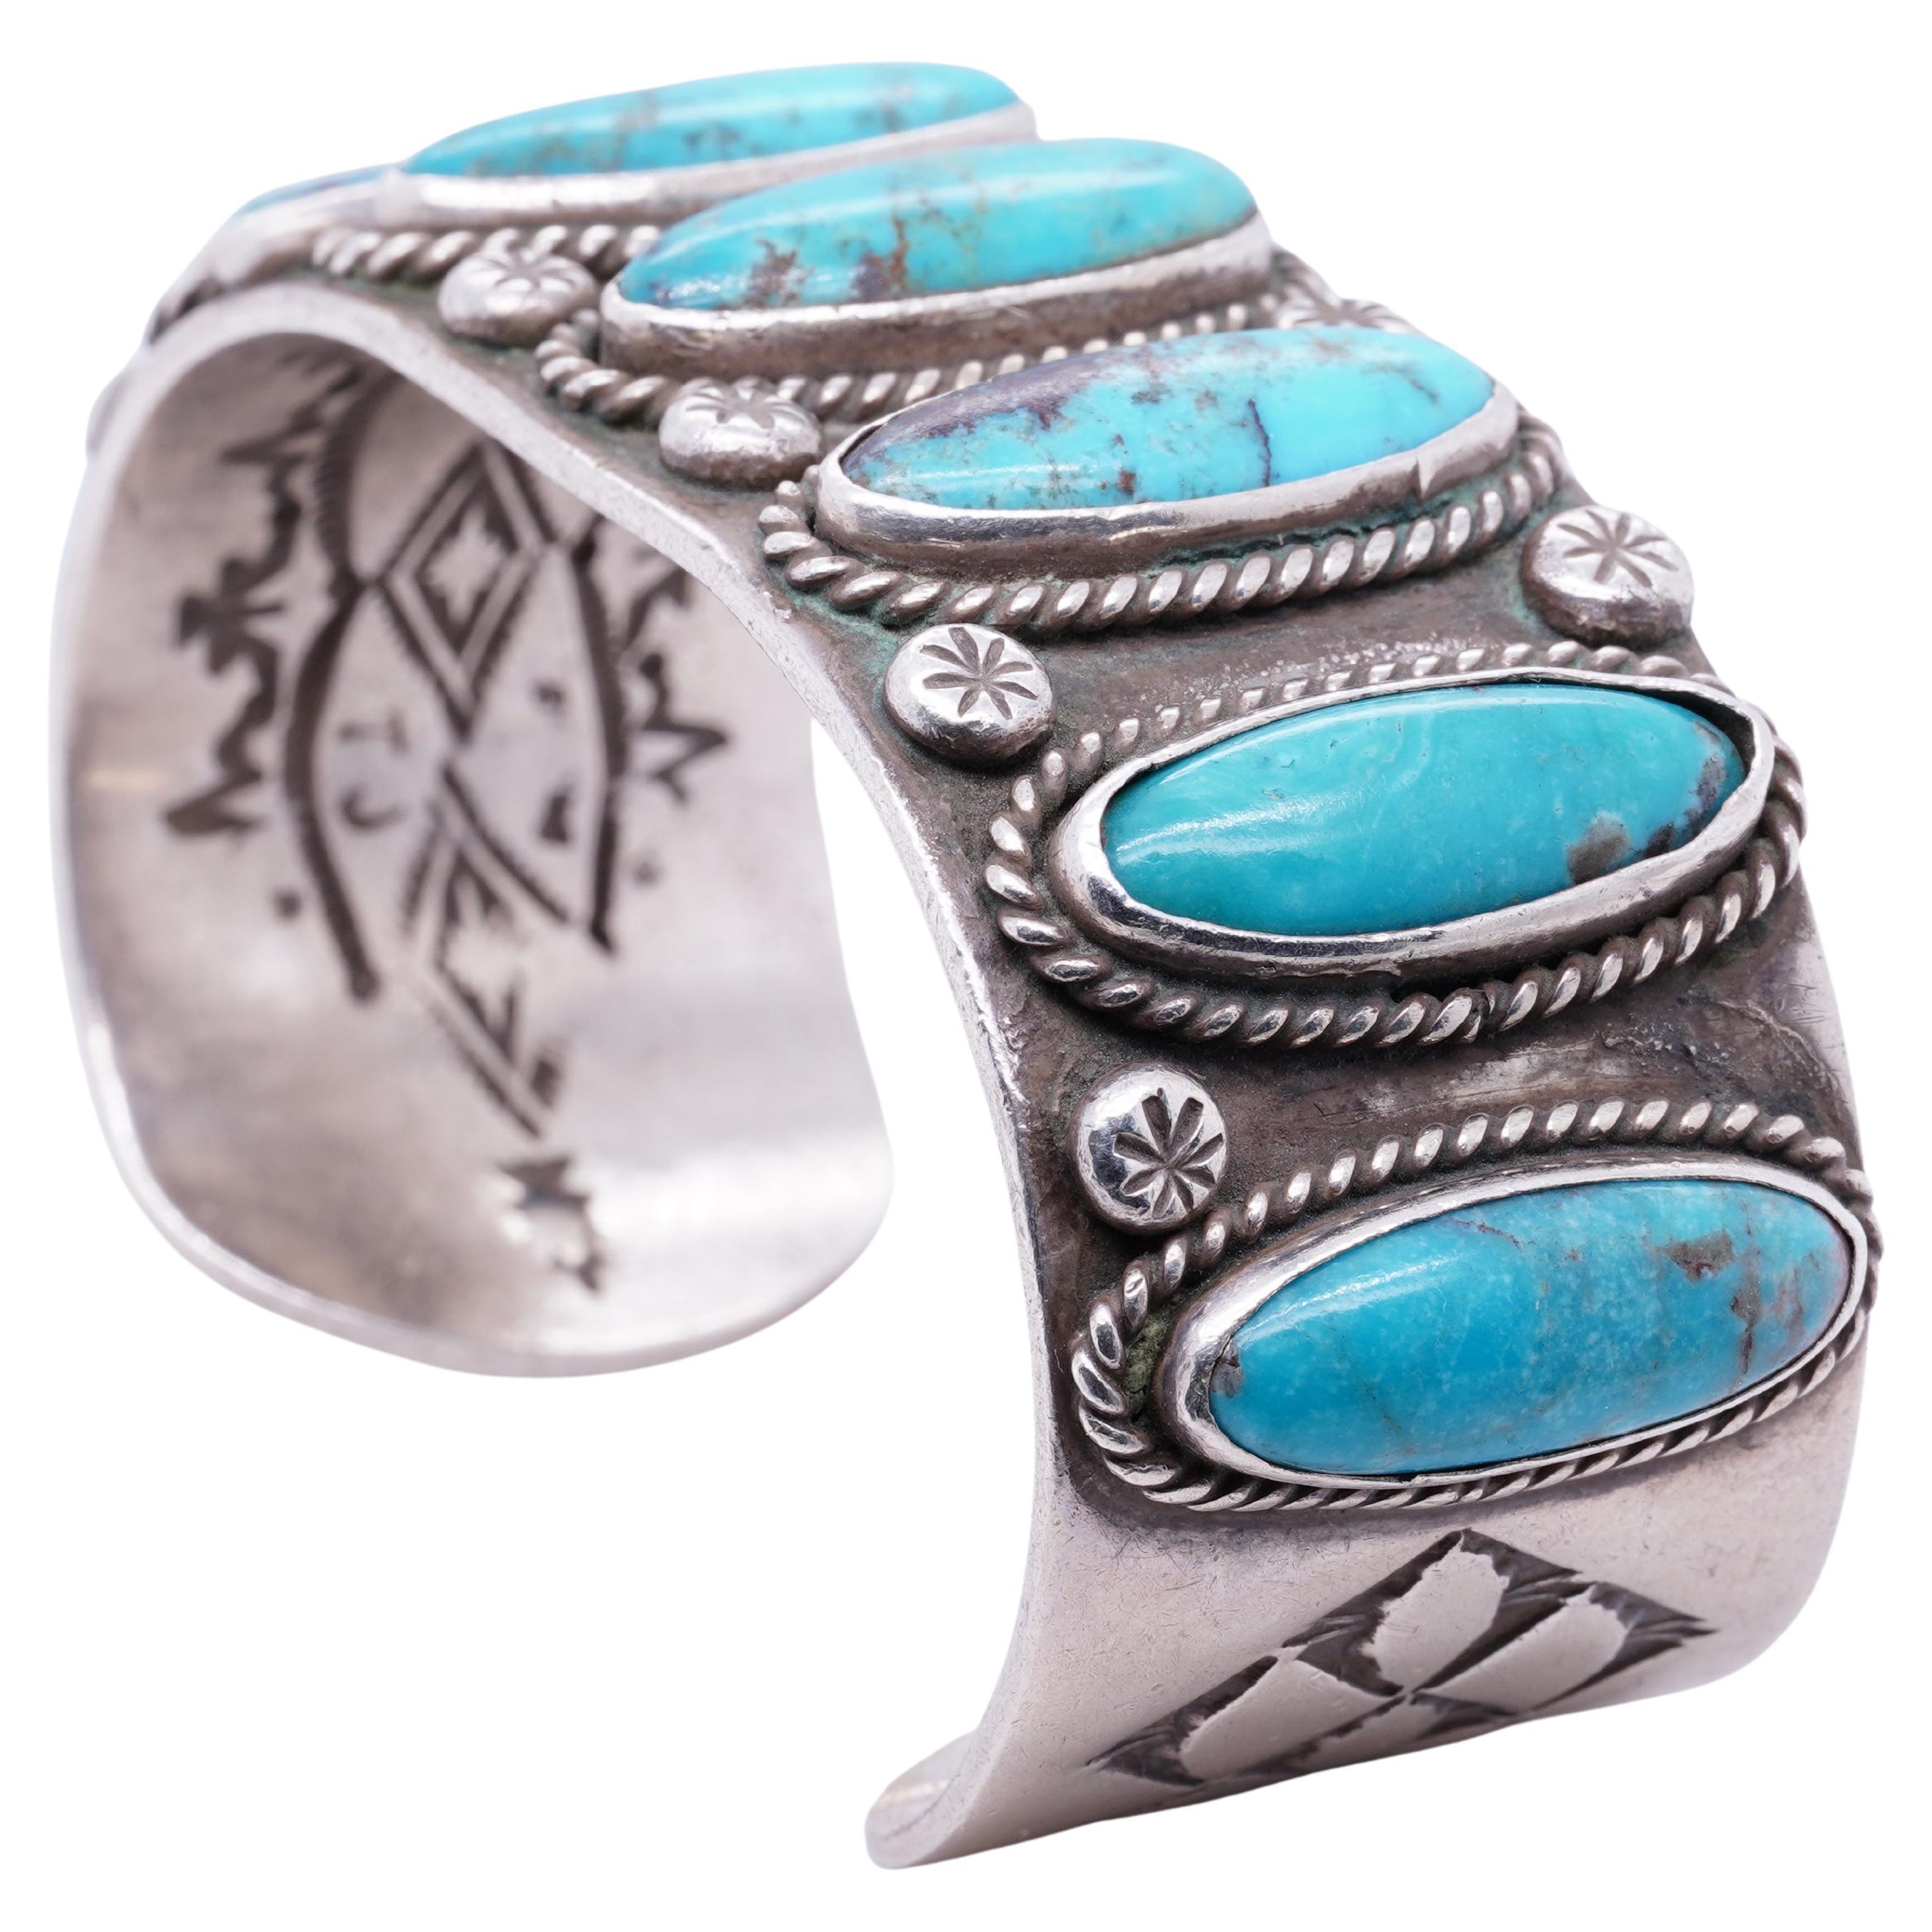 Vintage Native American Navajo Sterling Cuff Blue Ridge Oval Turquoise